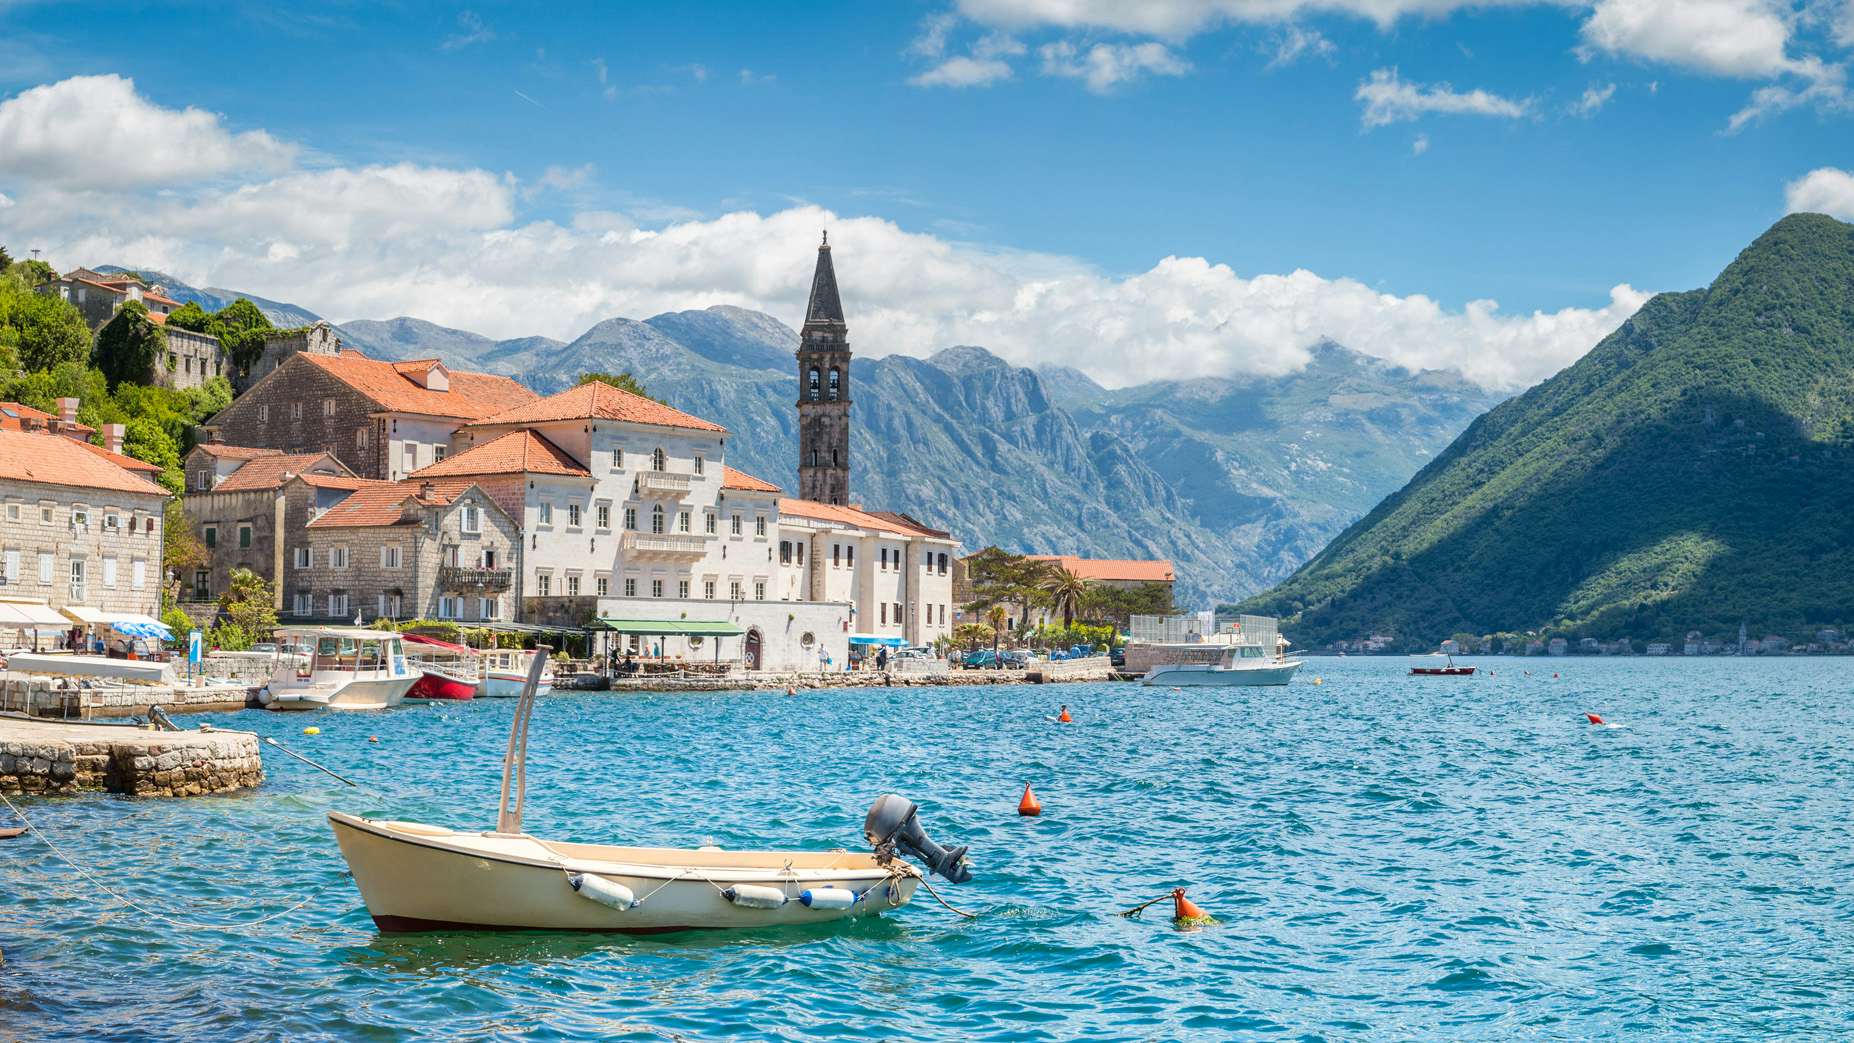 The picturesque coastal town in Montenegro, with historic architecture and a backdrop of majestic mountains, seen from the sea.